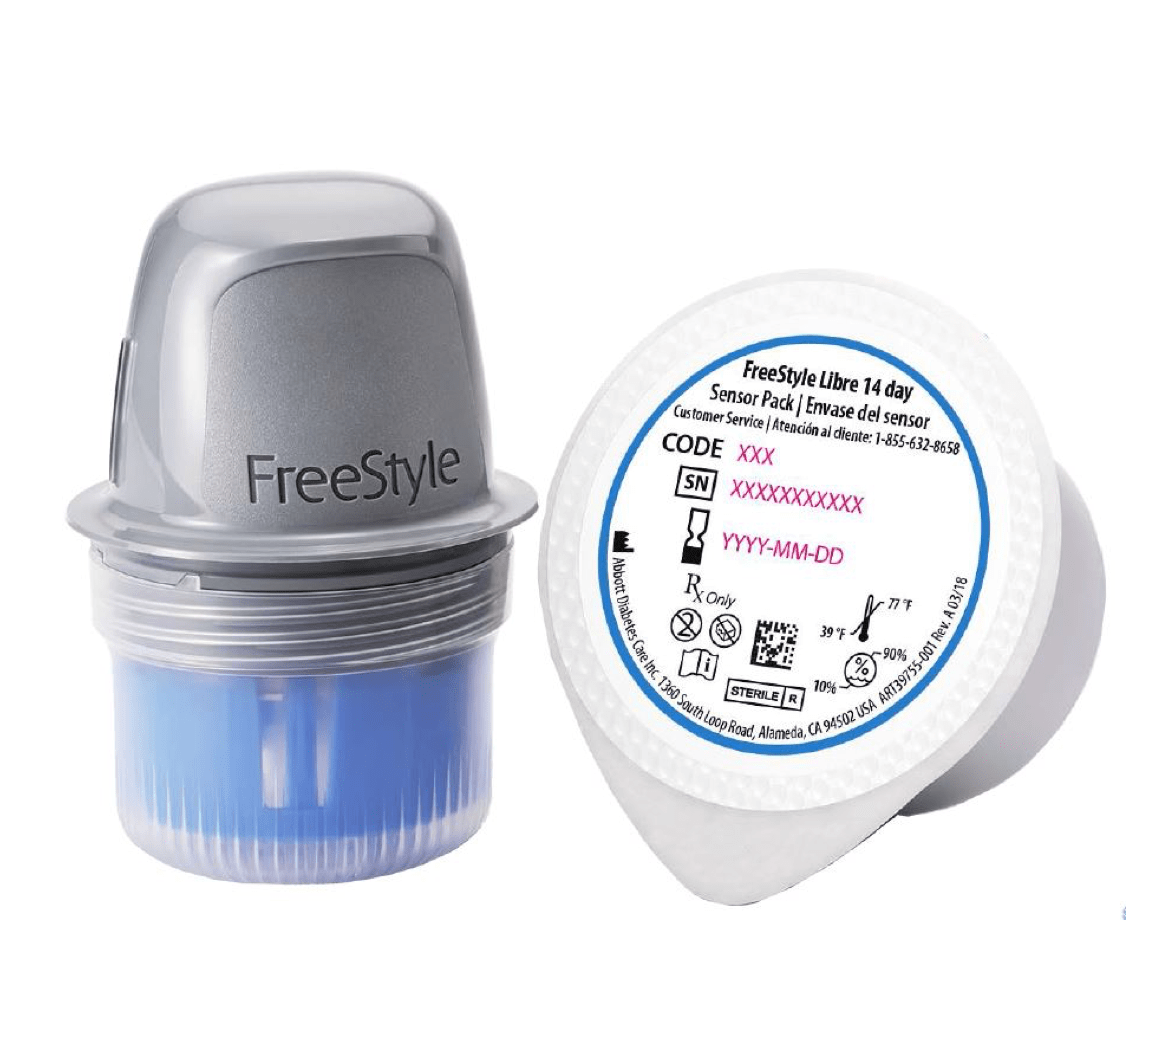 FreeStyle Libre 14 day applicator and sensor pack